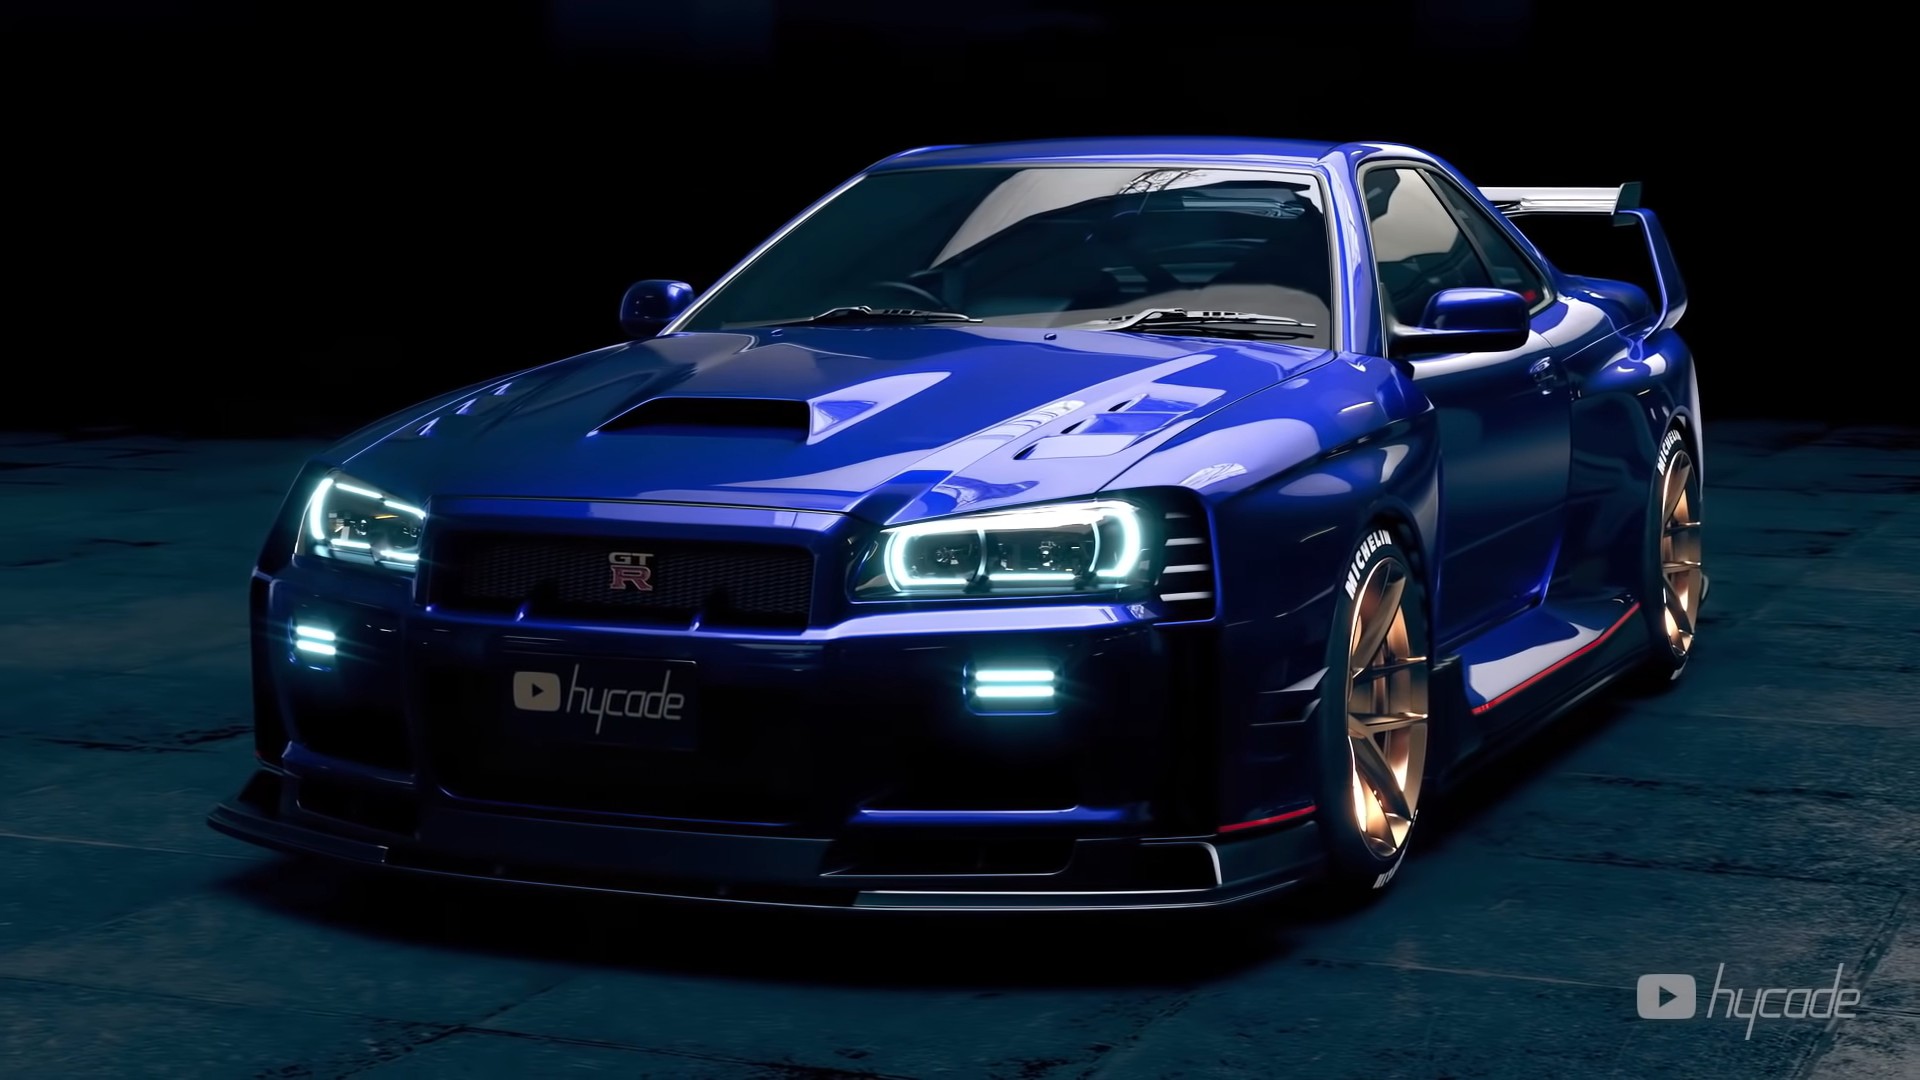 R34 Nissan GTR Looks Like a Nismo Supercar in Glossy Widebody